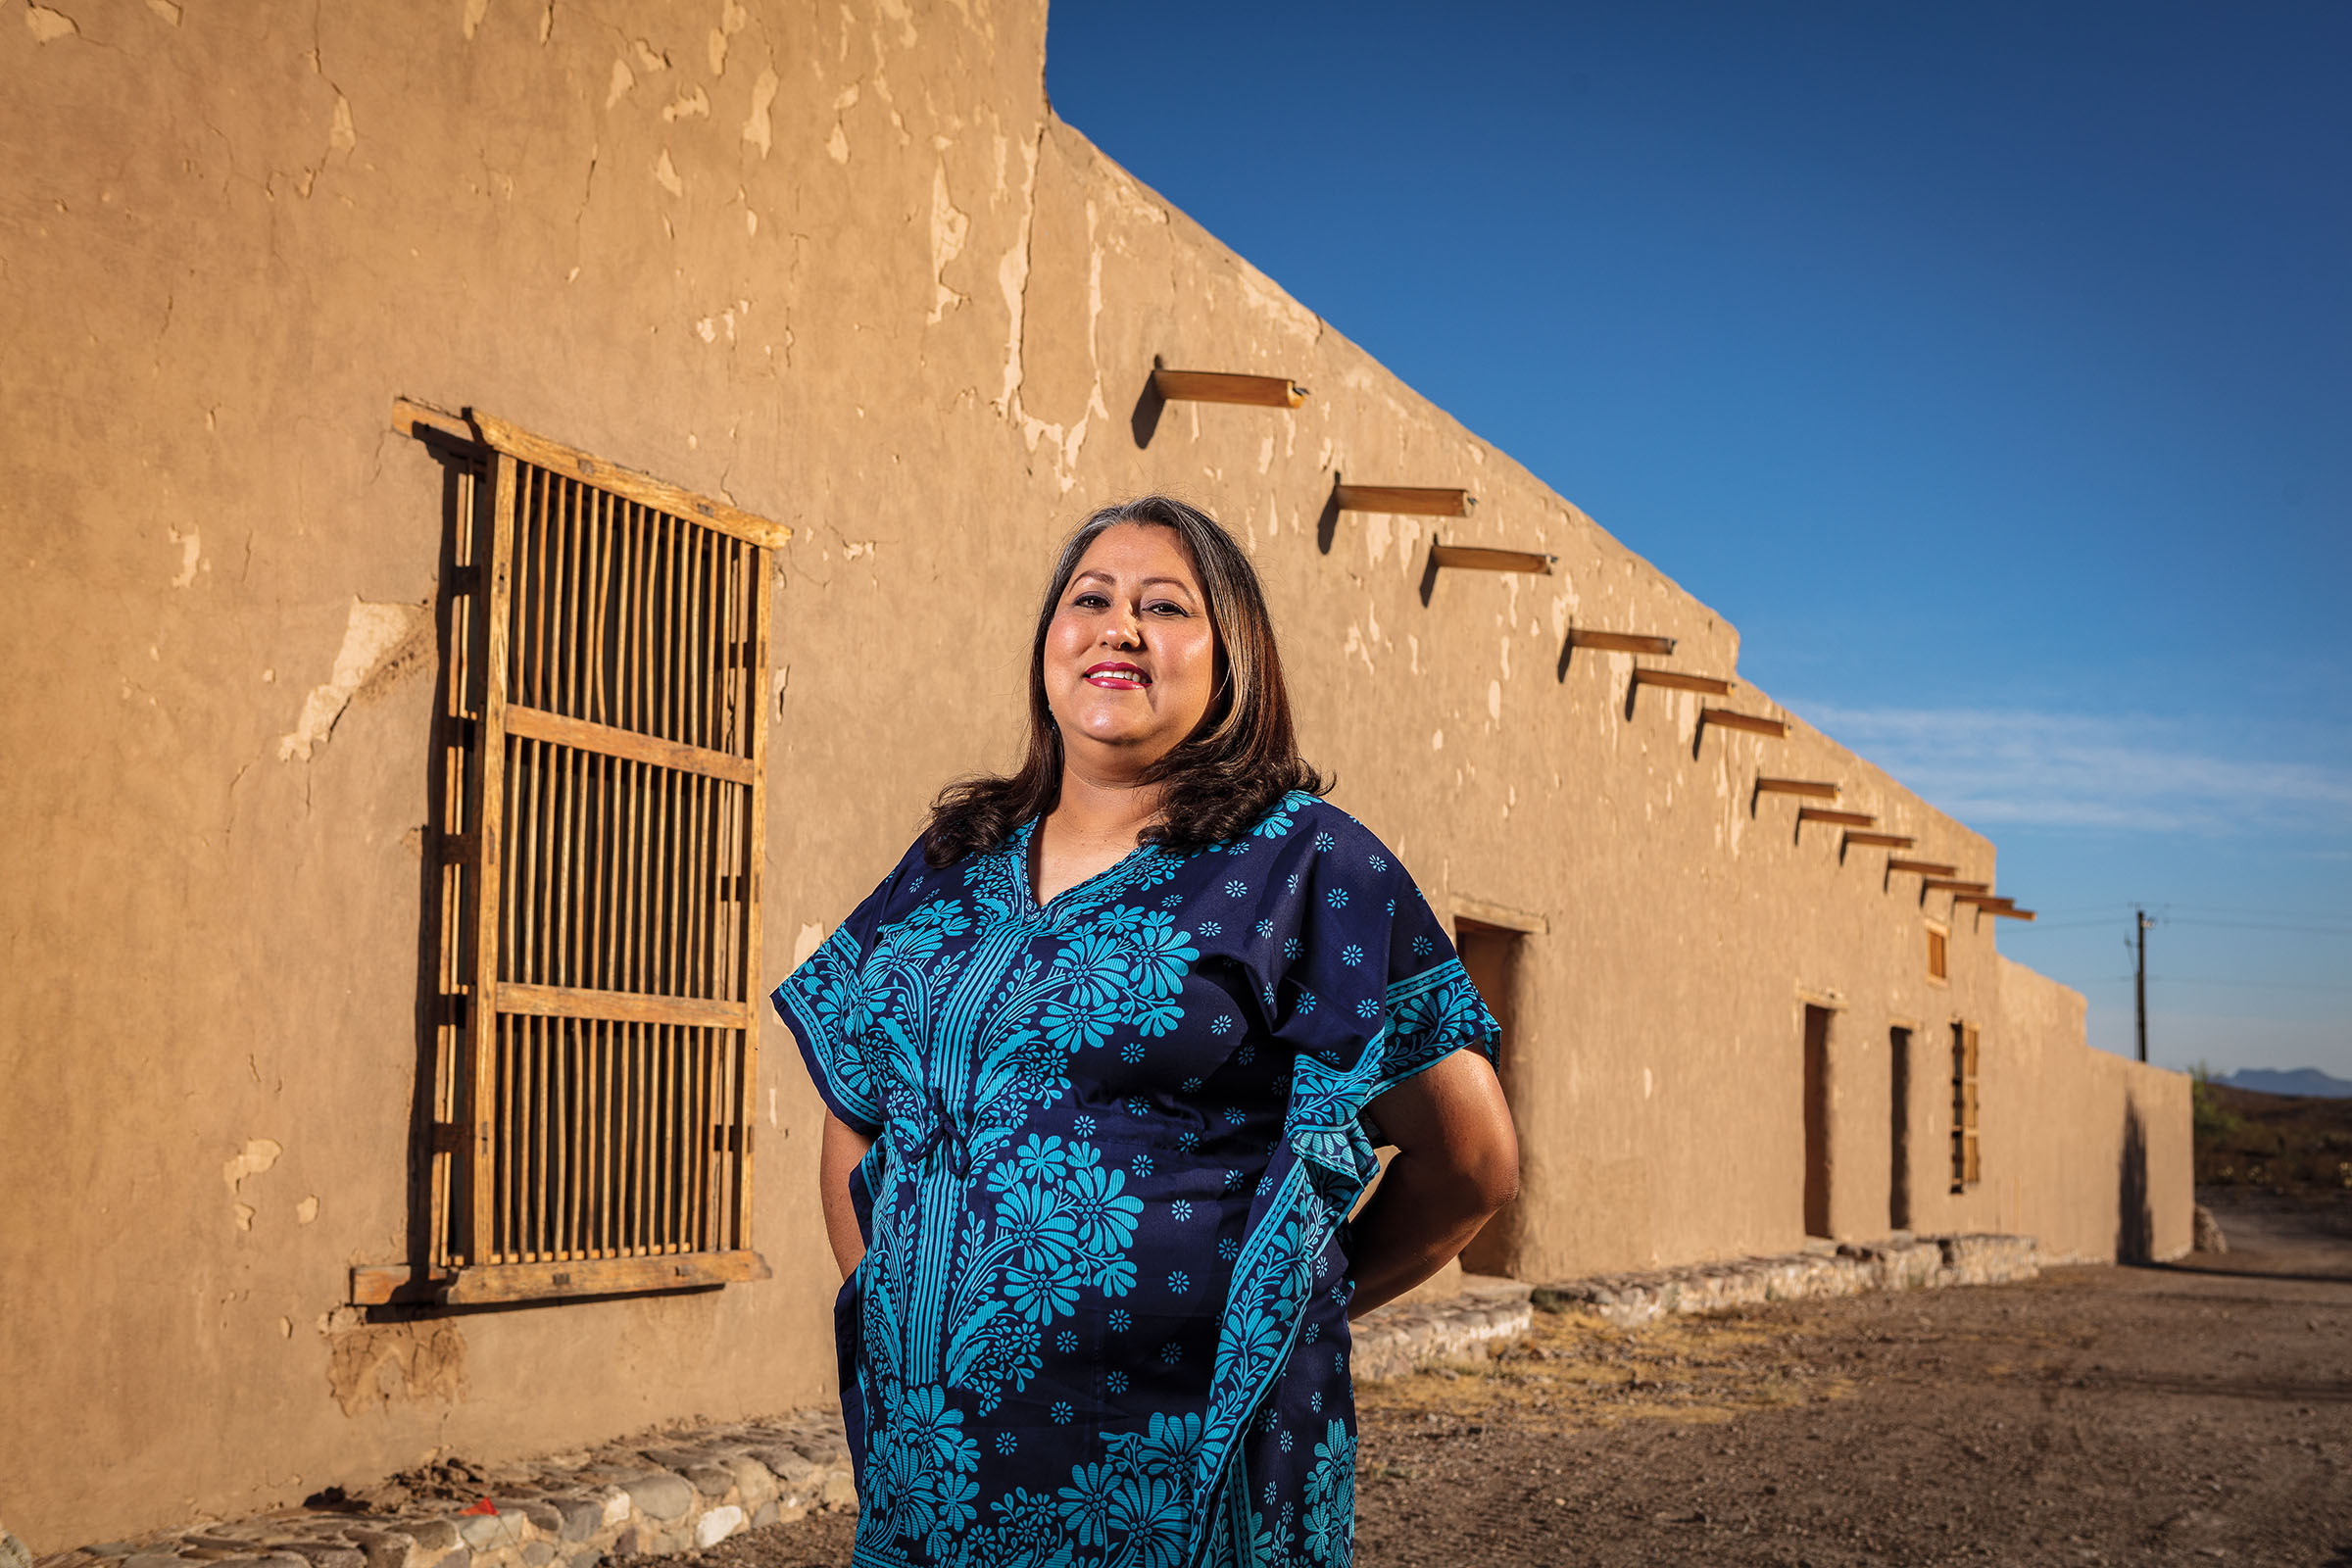 A woman stands outside of an adobe building under a clear blue sky